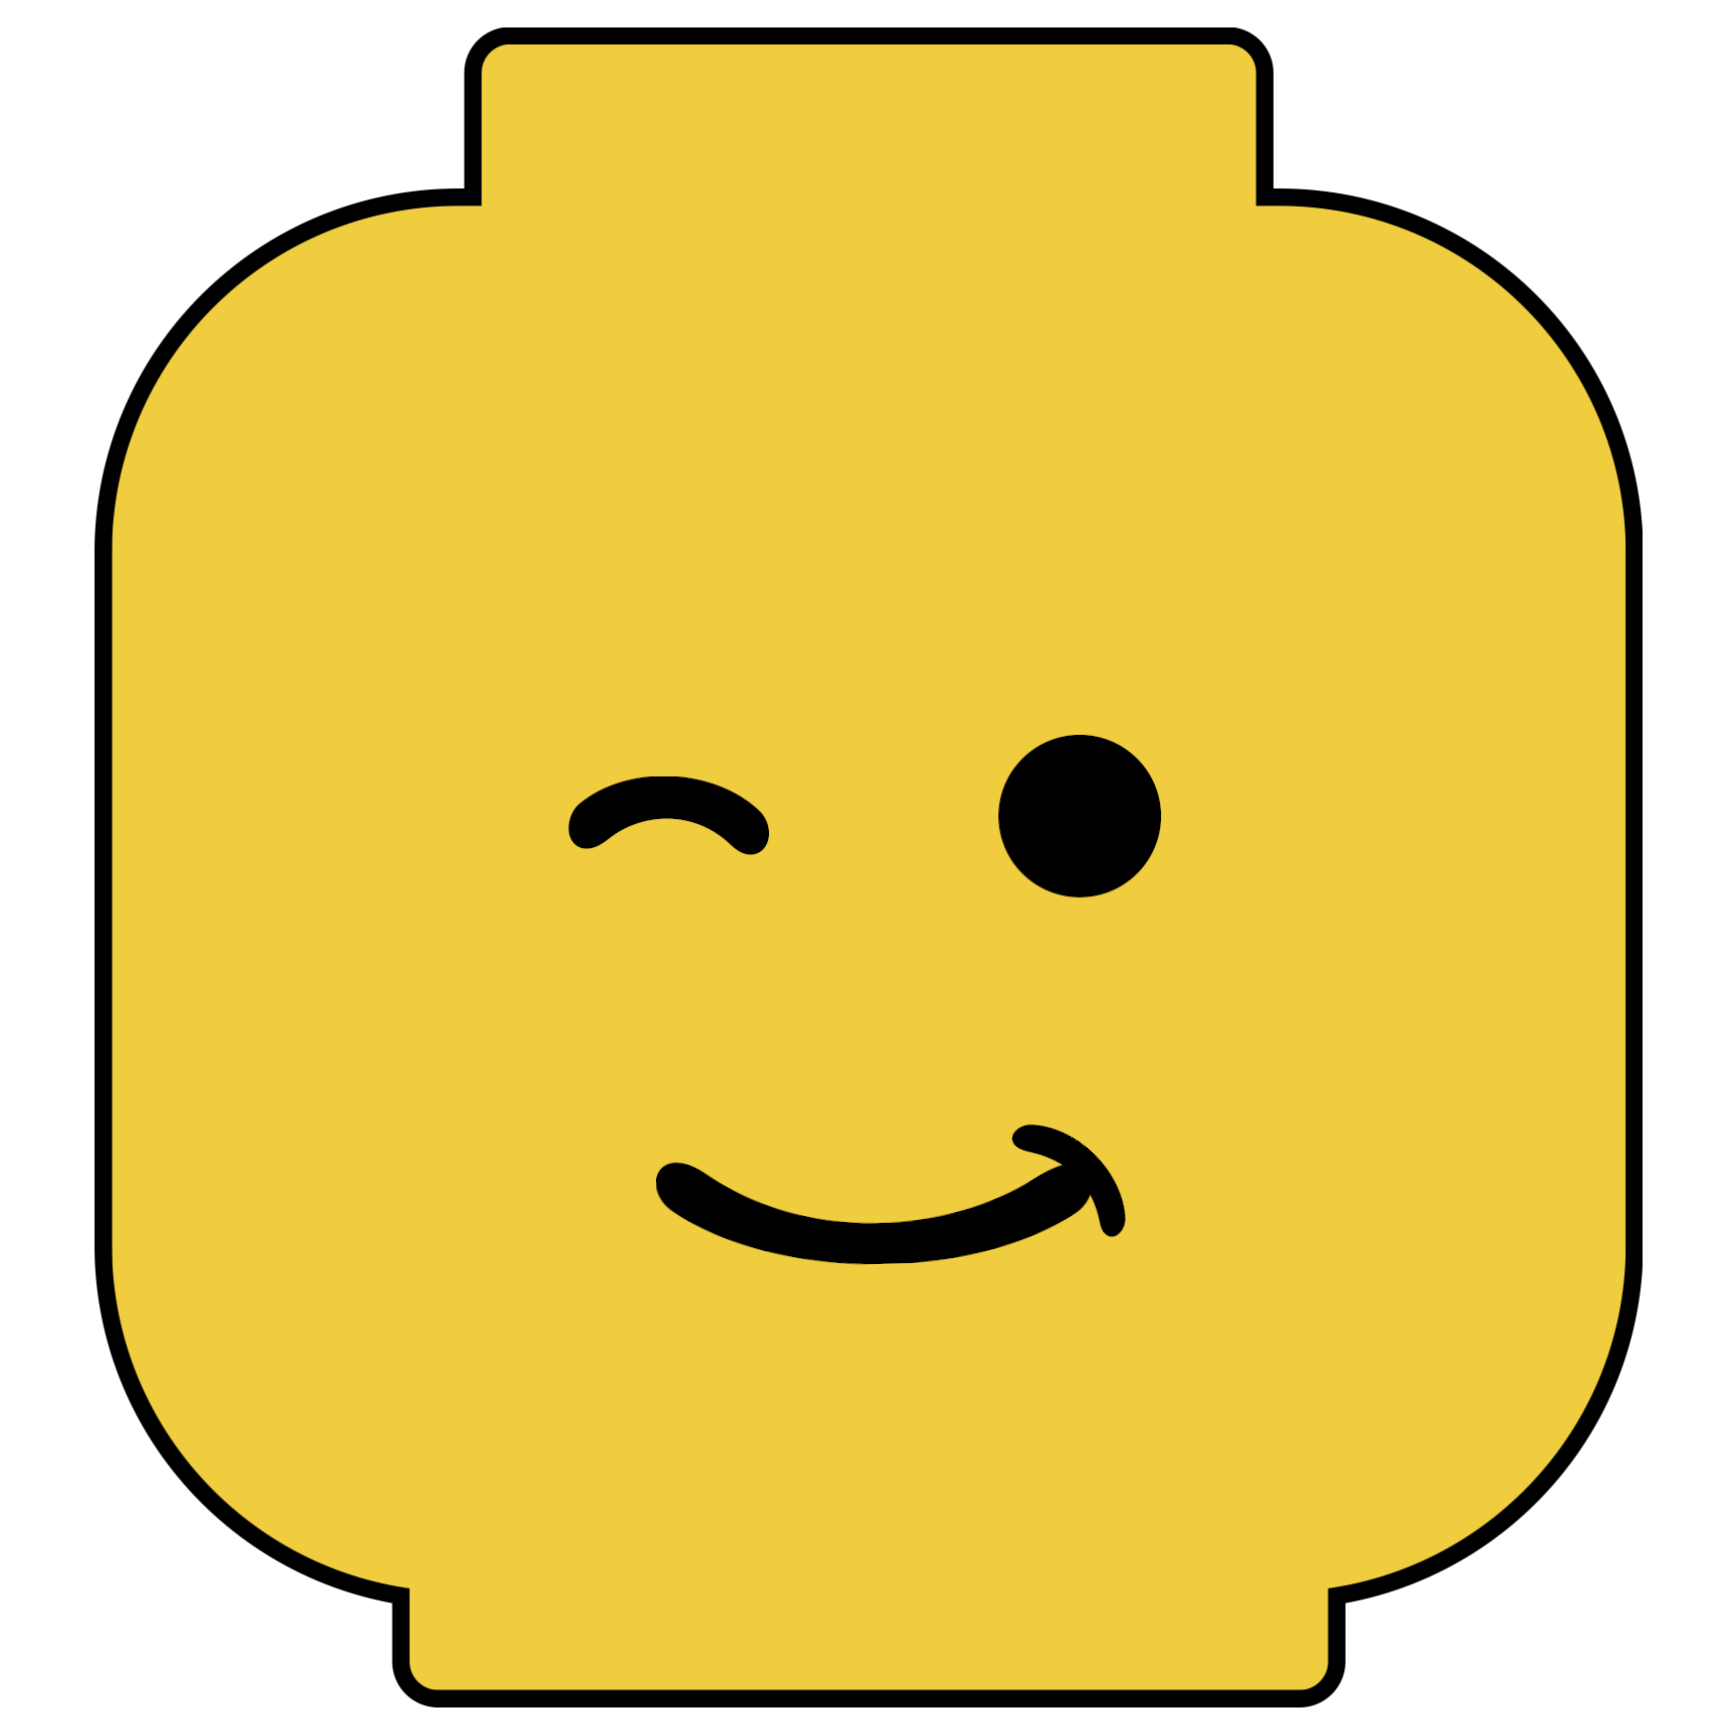 Lego Head Clipart Black And White